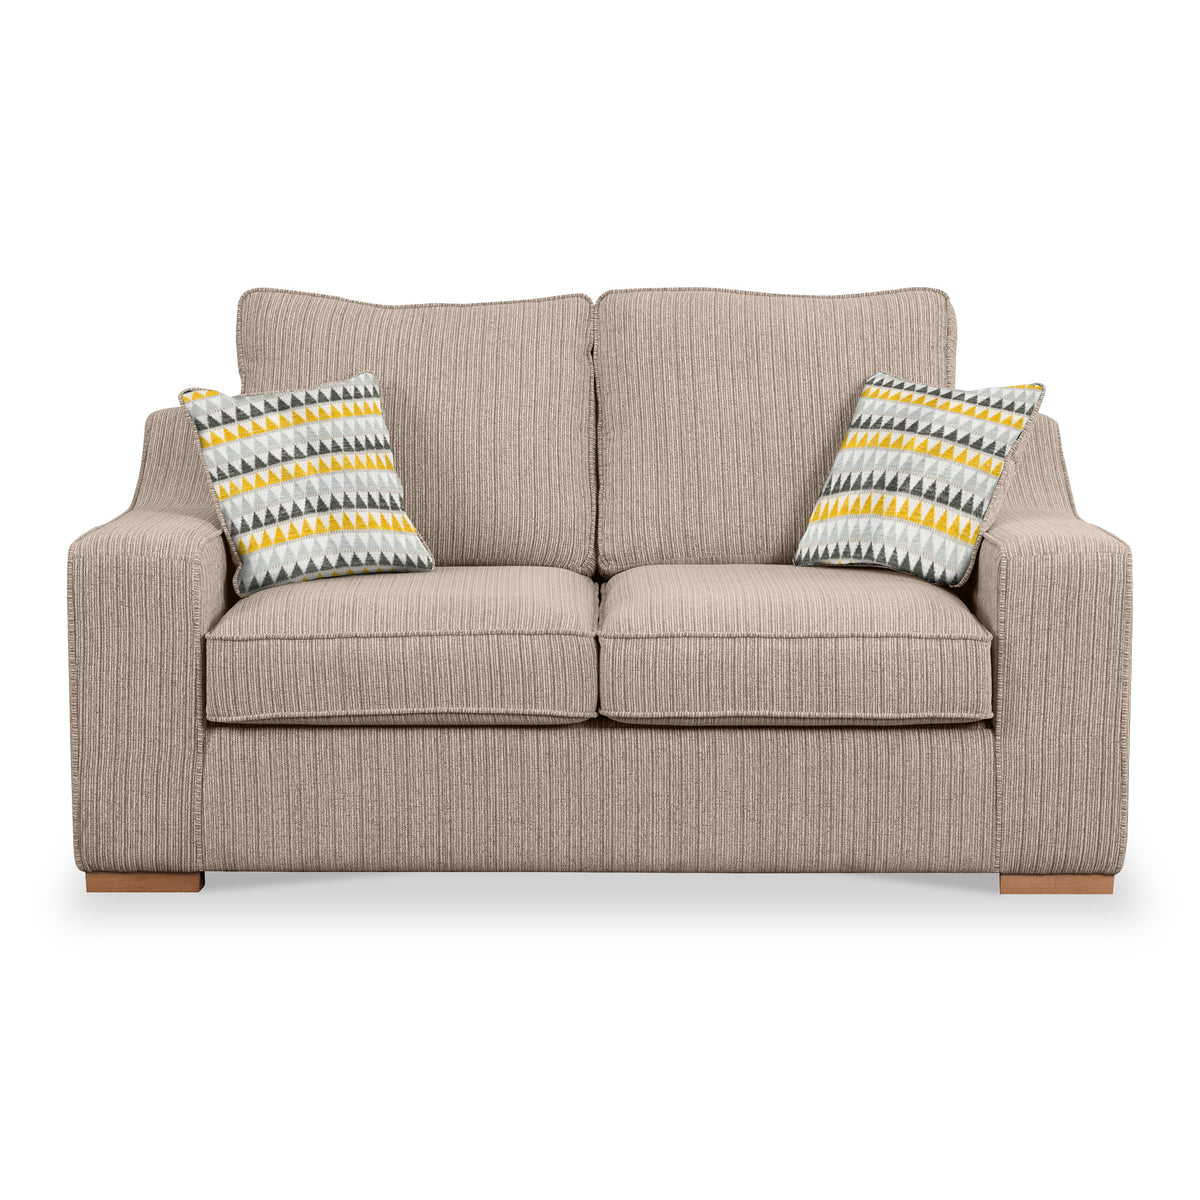 Ashow Beige 2 Seater Sofabed with Maika Mustard Scatter Cushions from Roseland furniture